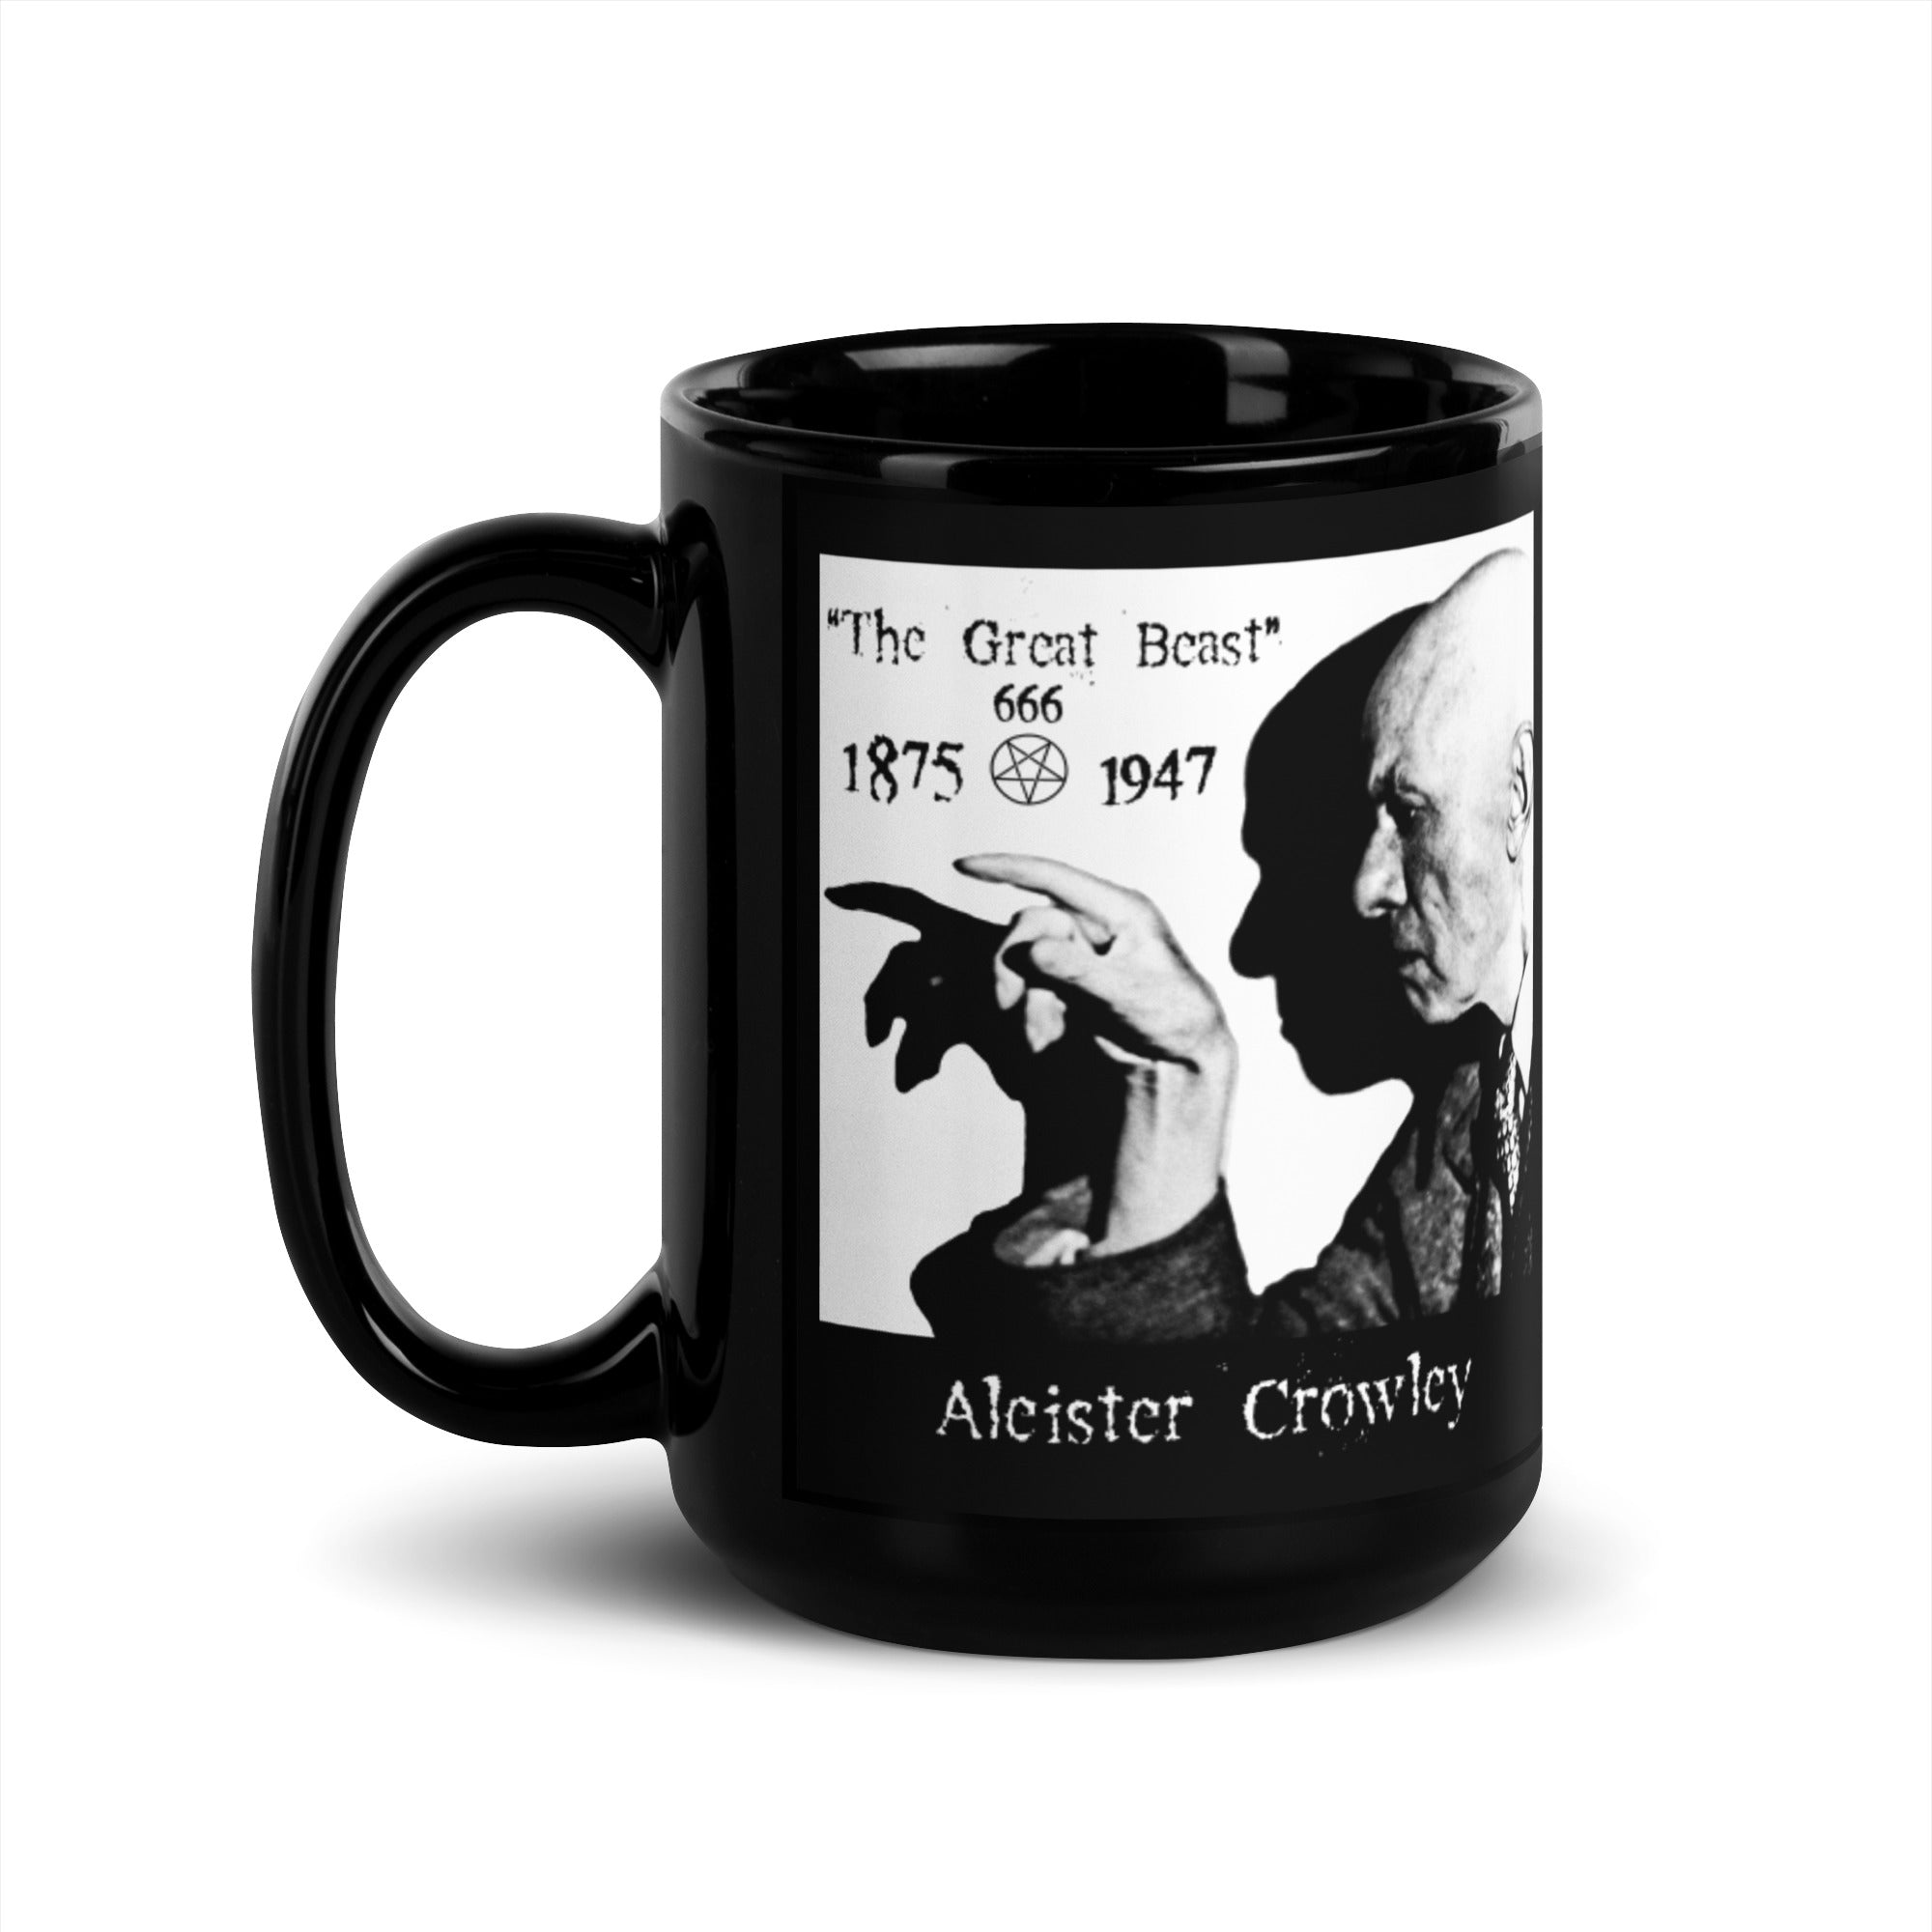 Aleister Crowley Infamous Occult Leader of Thelema Sex Magic on Black Glossy Mug - Edge of Life Designs